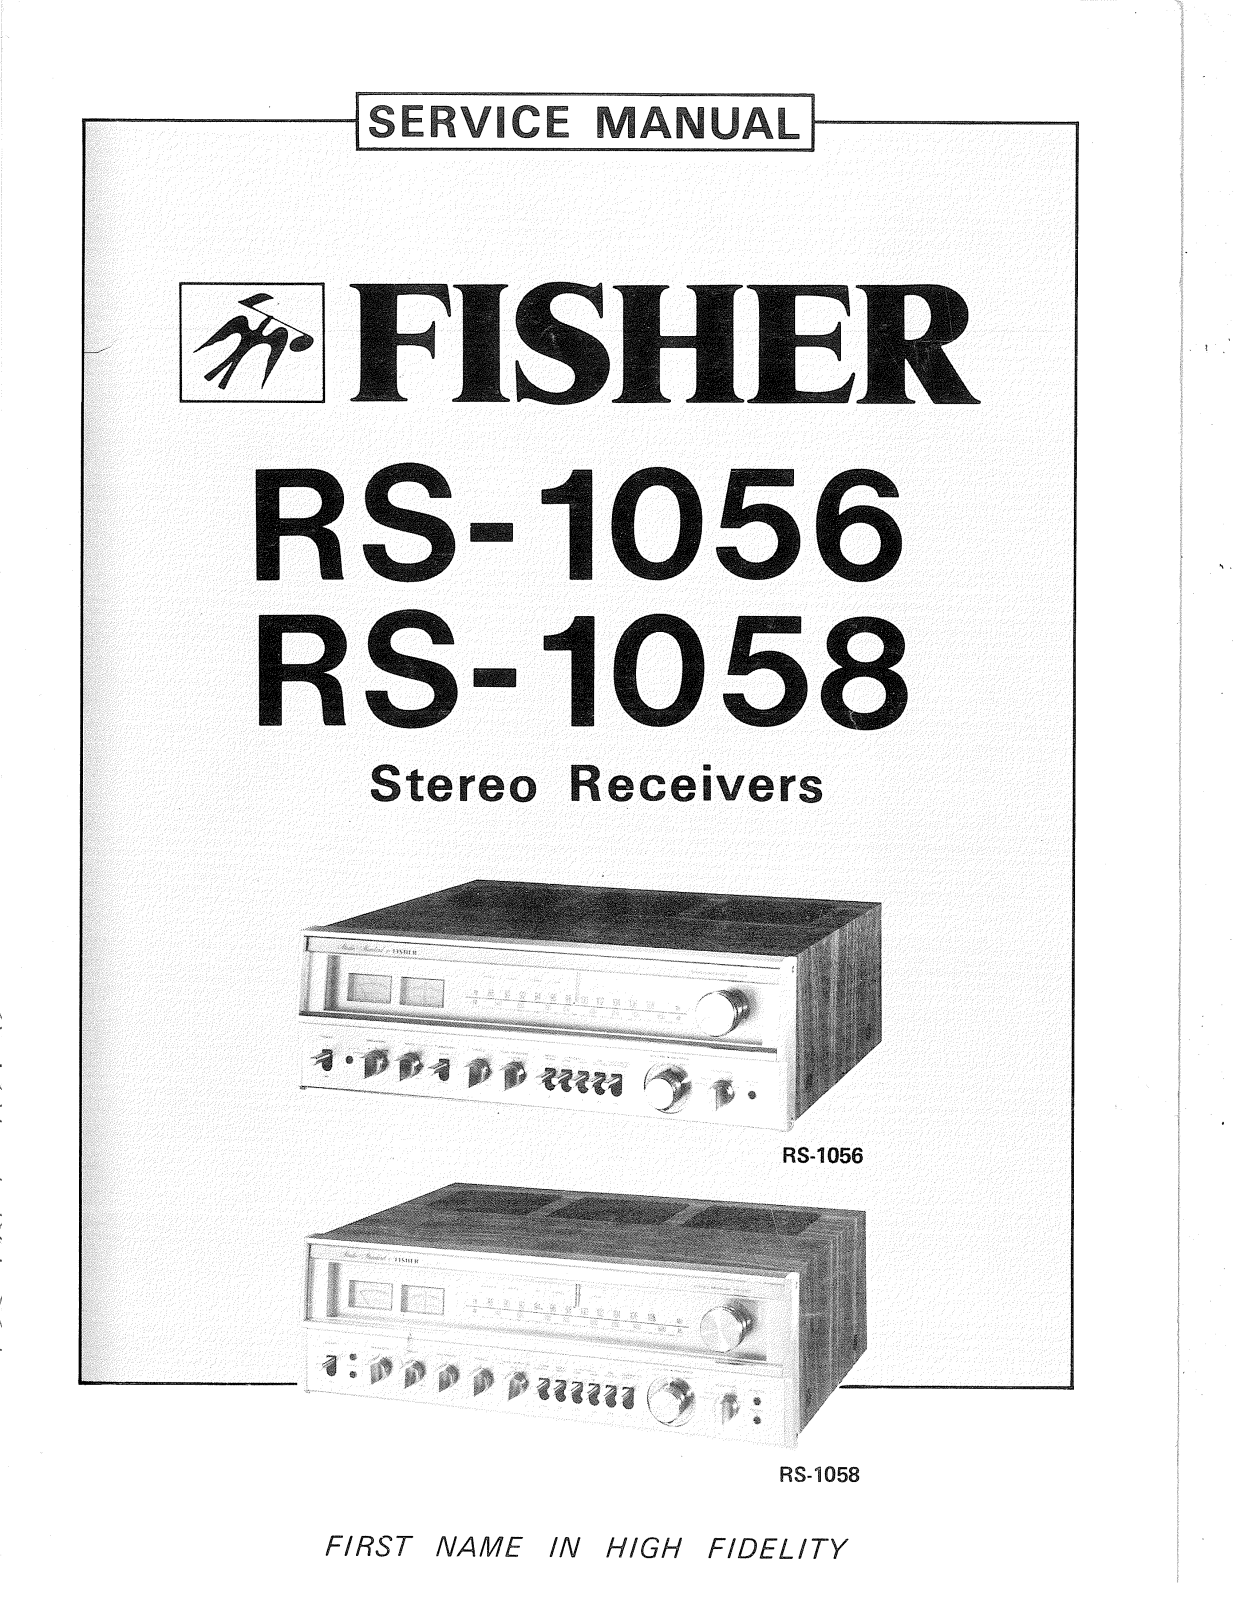 Fisher RS-1058, RS-1056 Service Manual